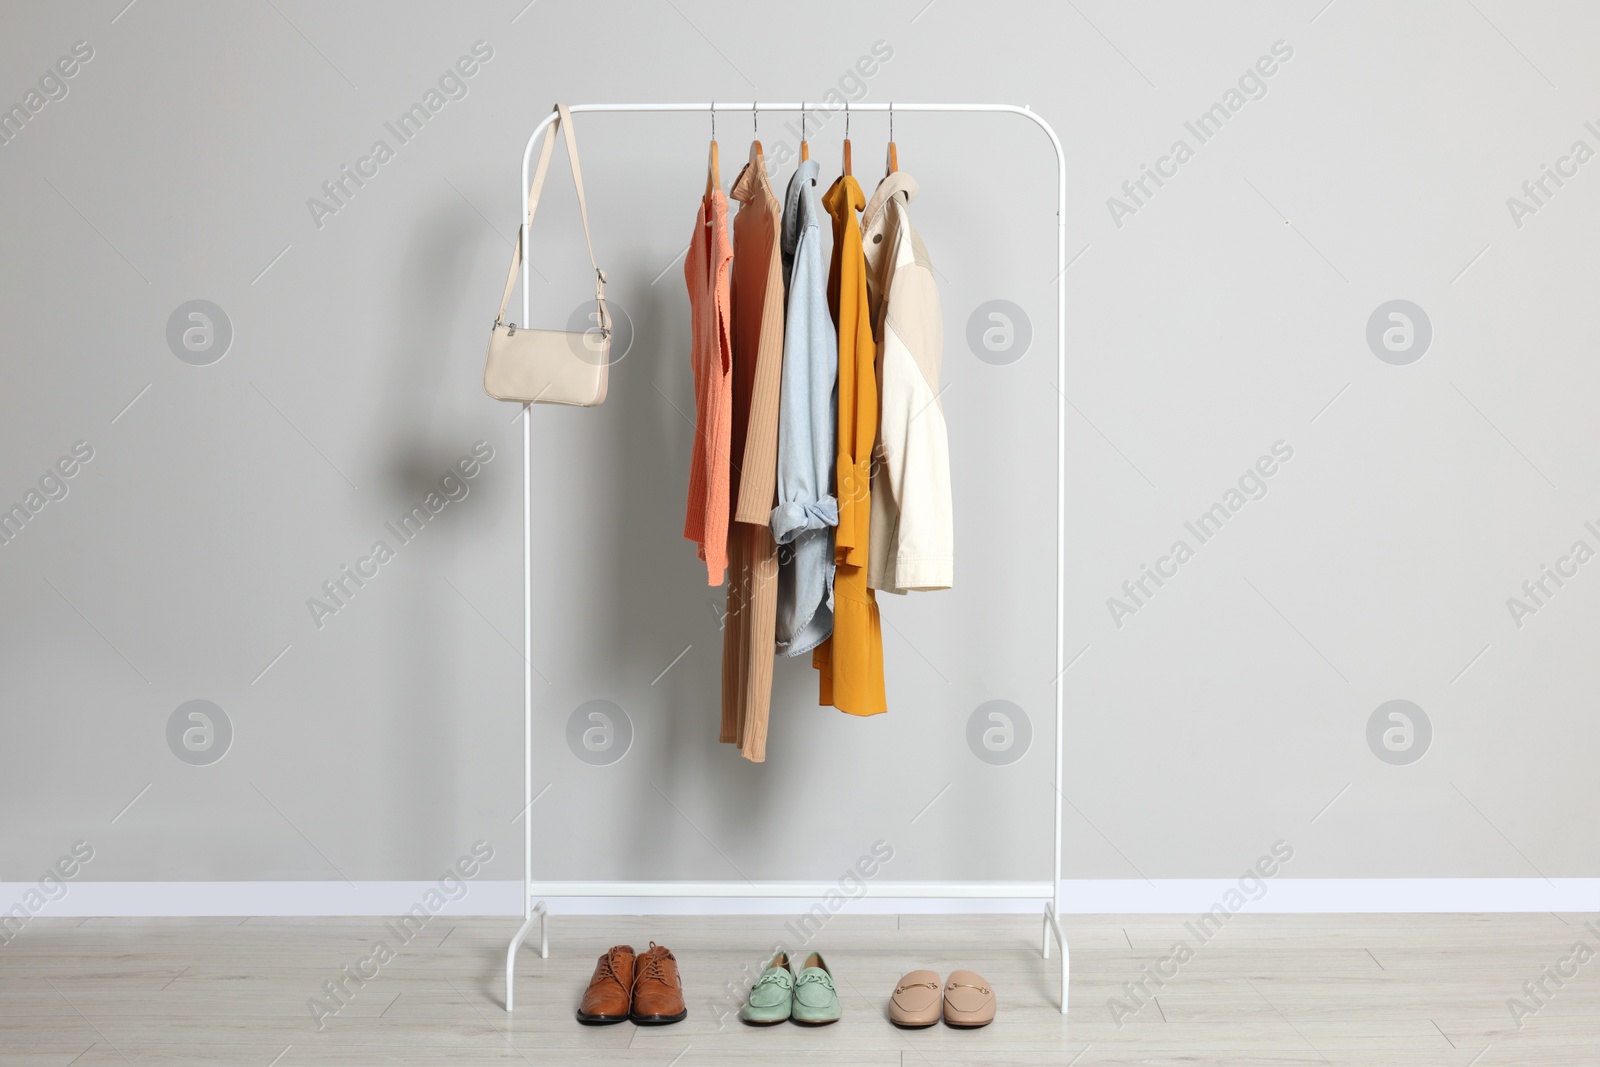 Photo of Rack with stylish women's clothes on wooden hangers, bag and shoes near light grey wall